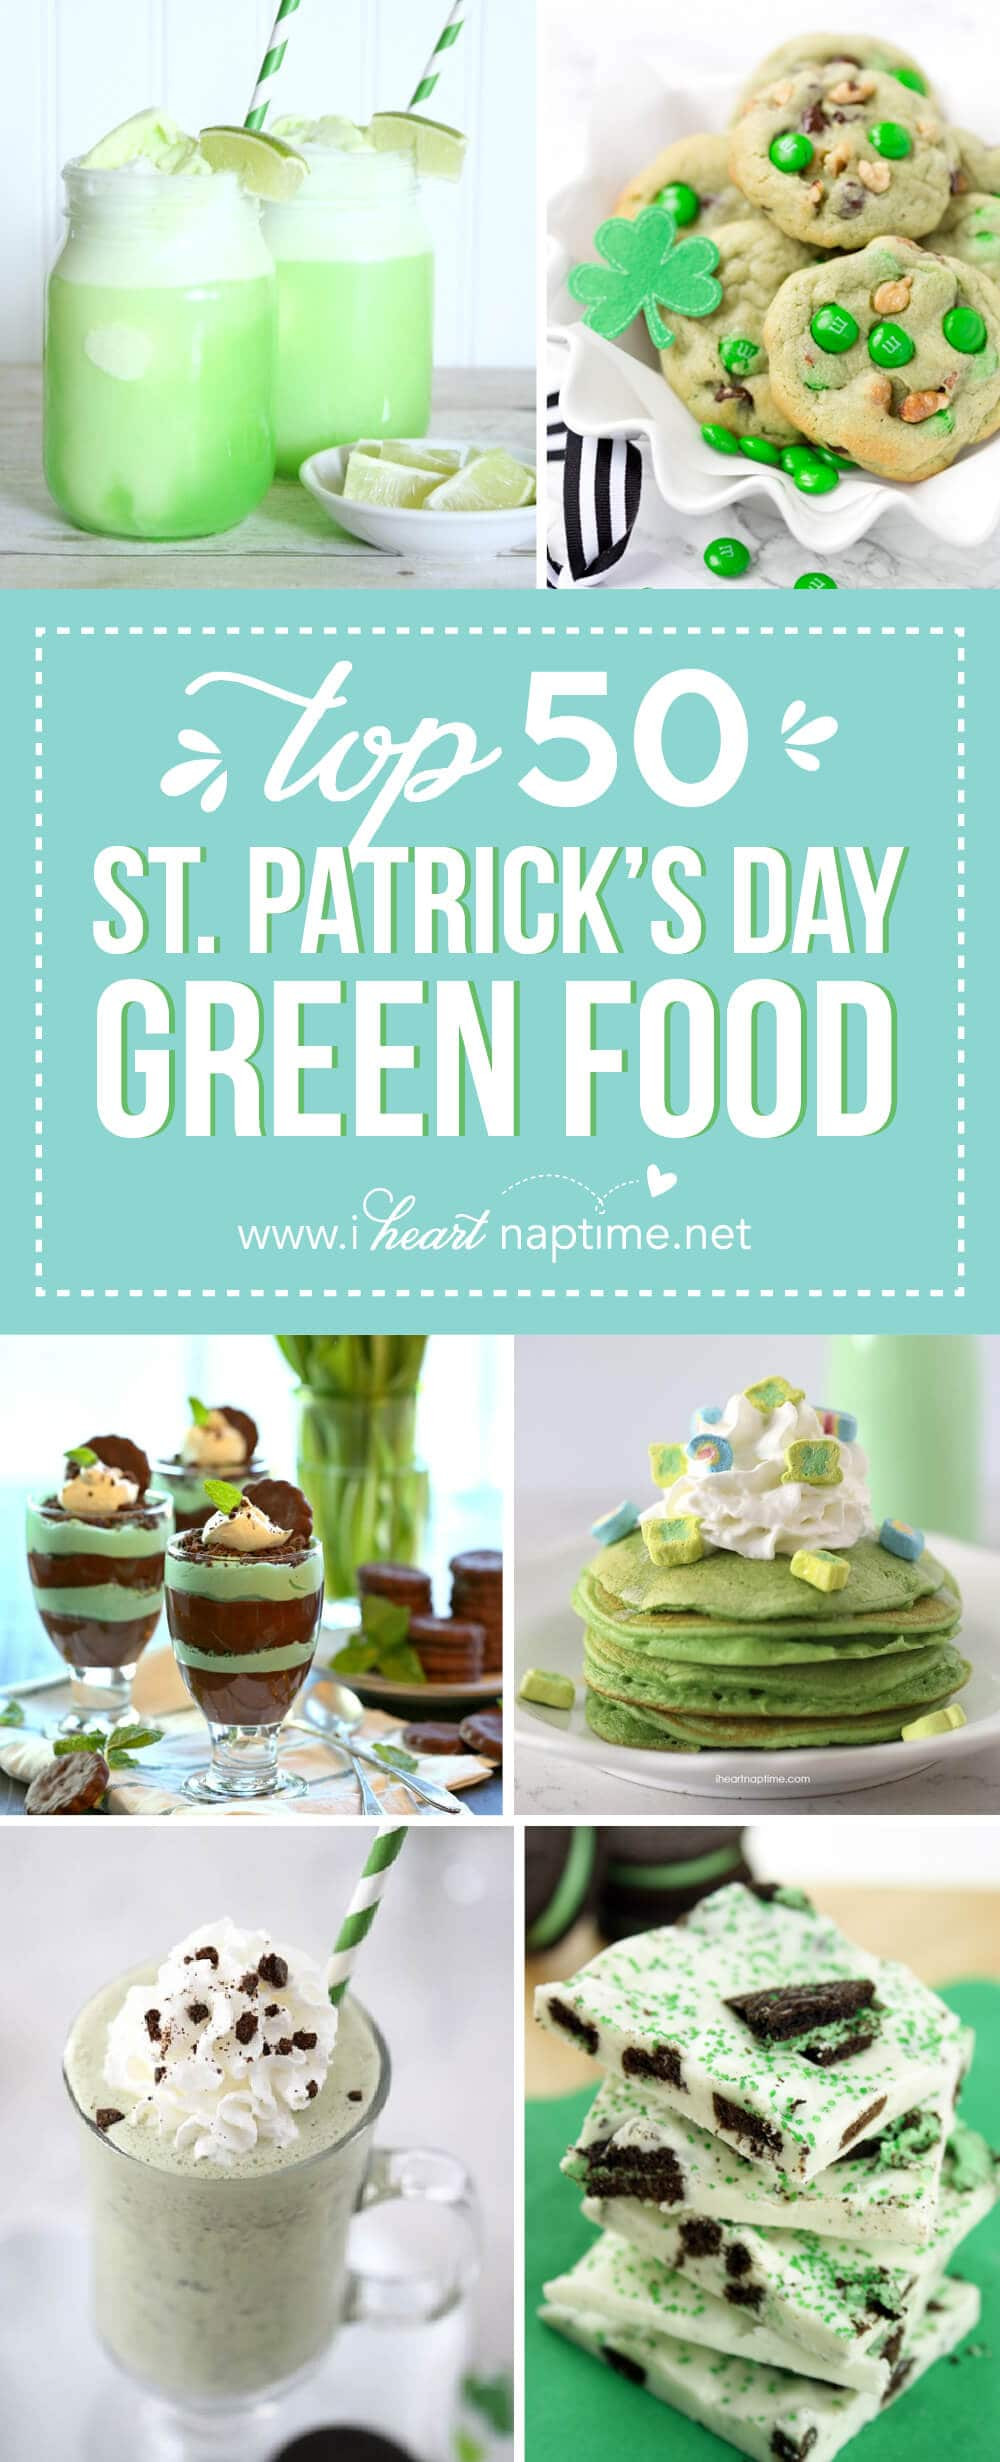 St Patrick's Day Traditions Food
 Top 50 St Patrick s Day Green Food I Heart Nap Time